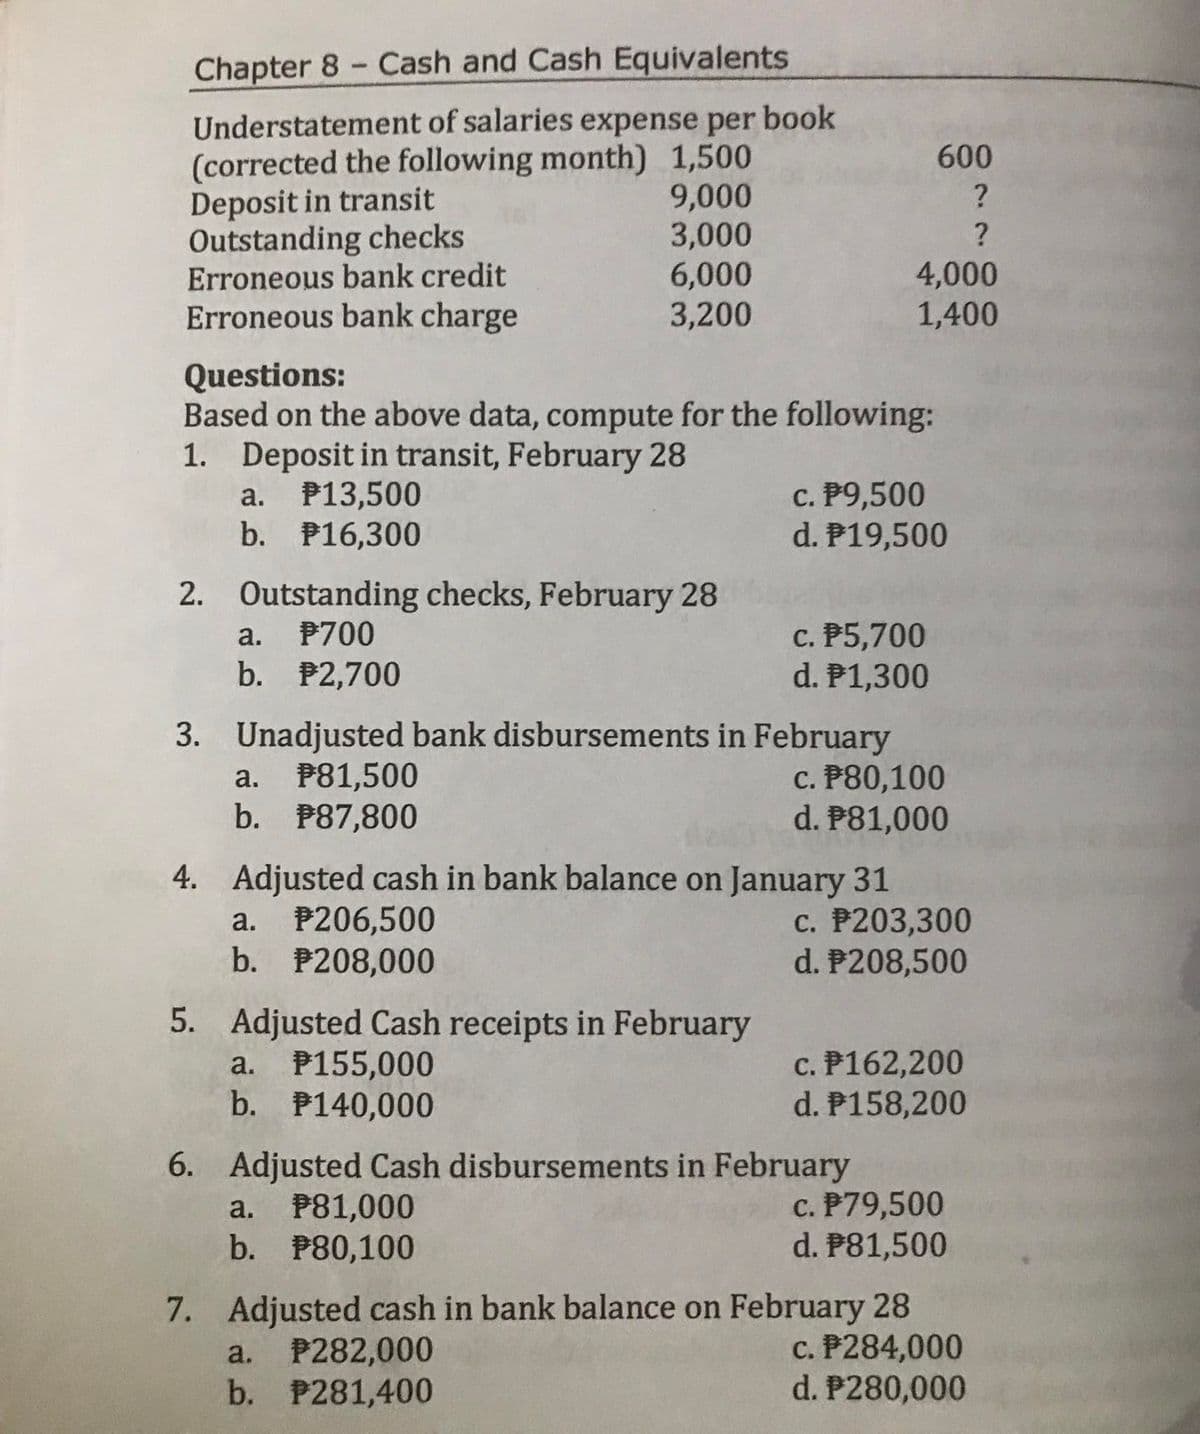 Chapter 8 Cash and Cash Equivalents
Understatement of salaries expense per book
(corrected the following month) 1,500
9,000
3,000
6,000
3,200
600
Deposit in transit
Outstanding checks
Erroneous bank credit
?
4,000
1,400
Erroneous bank charge
Questions:
Based on the above data, compute for the following:
1. Deposit in transit, February 28
с. Р9,500
d. P19,500
a.
P13,500
b. P16,300
2. Outstanding checks, February 28
c. P5,700
d. P1,300
a.
P700
b. P2,700
3. Unadjusted bank disbursements in February
с. Р80,100
d. P81,000
P81,500
b. P87,800
a.
4. Adjusted cash in bank balance on January 31
a. P206,500
b. P208,000
c. P203,300
d. P208,500
5. Adjusted Cash receipts in February
a. P155,000
b. P140,000
c. P162,200
d. P158,200
6. Adjusted Cash disbursements in February
c. P79,500
d. P81,500
P81,000
b. P80,100
a.
7. Adjusted cash in bank balance on February 28
c. P284,000
d. P280,000
P282,000
b. P281,400
a.
